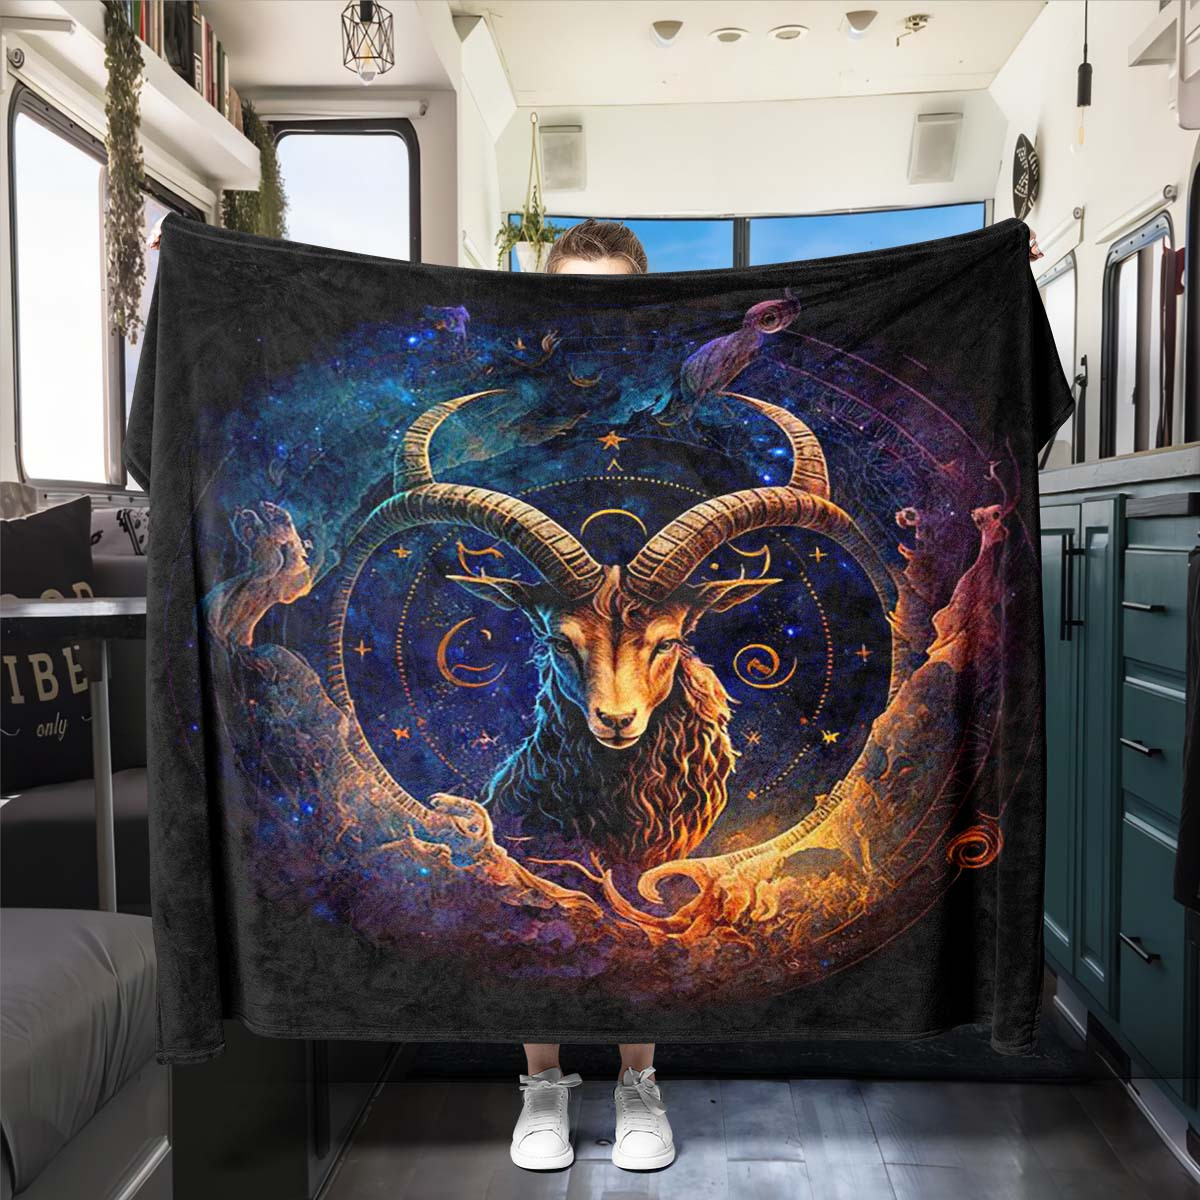 

Capricorn Zodiac Constellation Art Print Flannel Blanket - Polyester Soft Office Chair Throw For All Seasons - Indoor & Outdoor Use Lightweight Astrological Decorative Tapestry - 100% Polyester